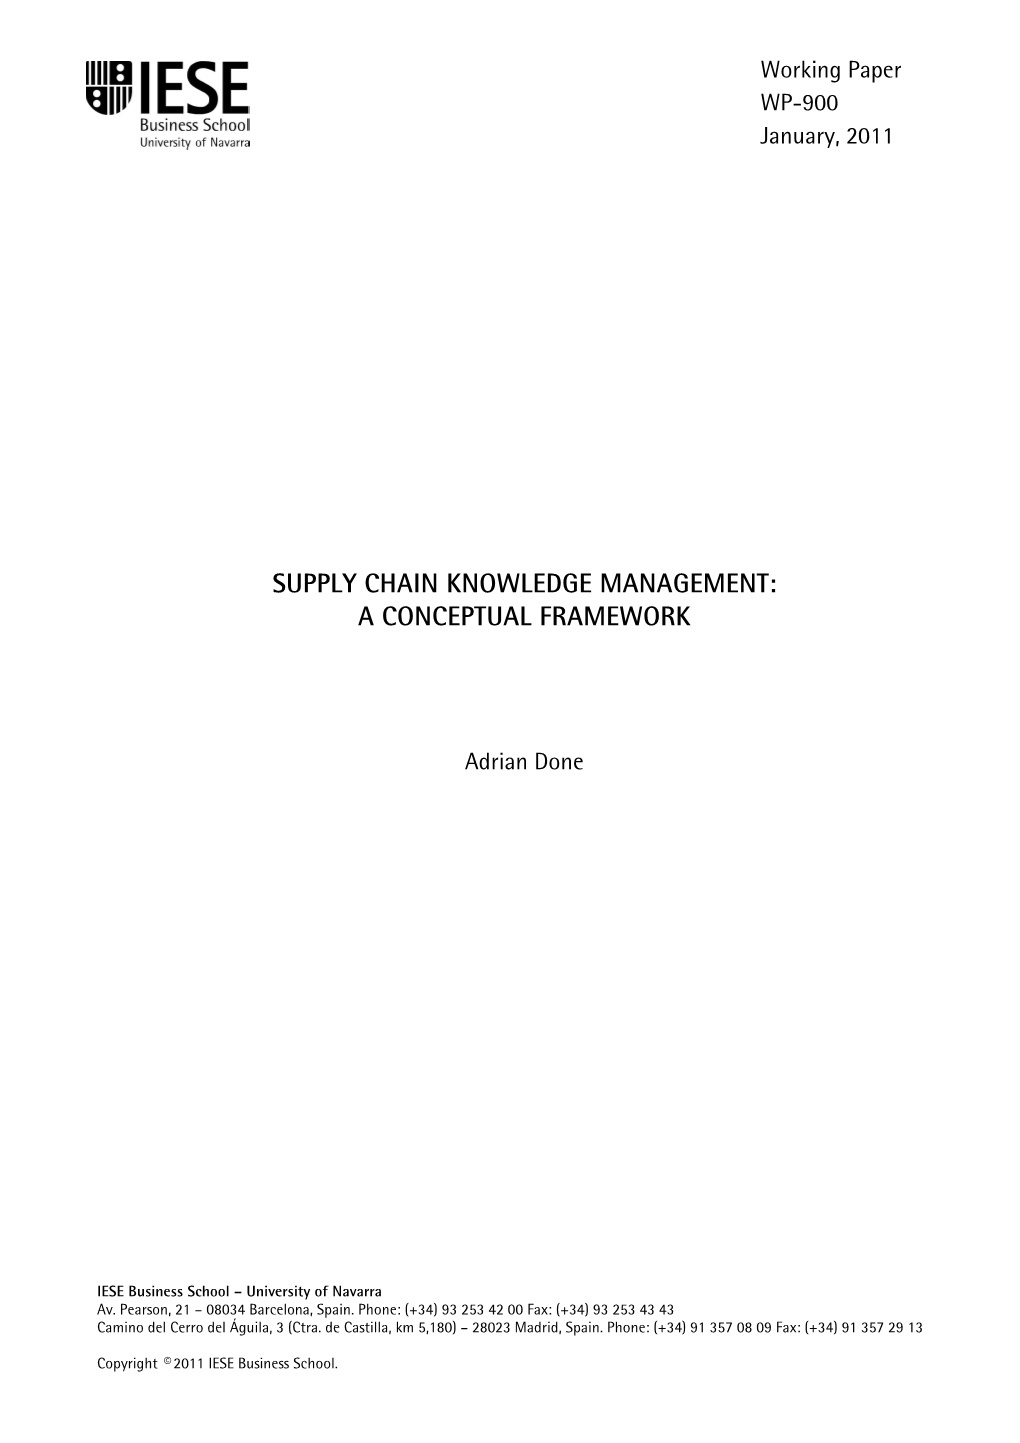 Supply Chain Knowledge Management: a Conceptual Framework